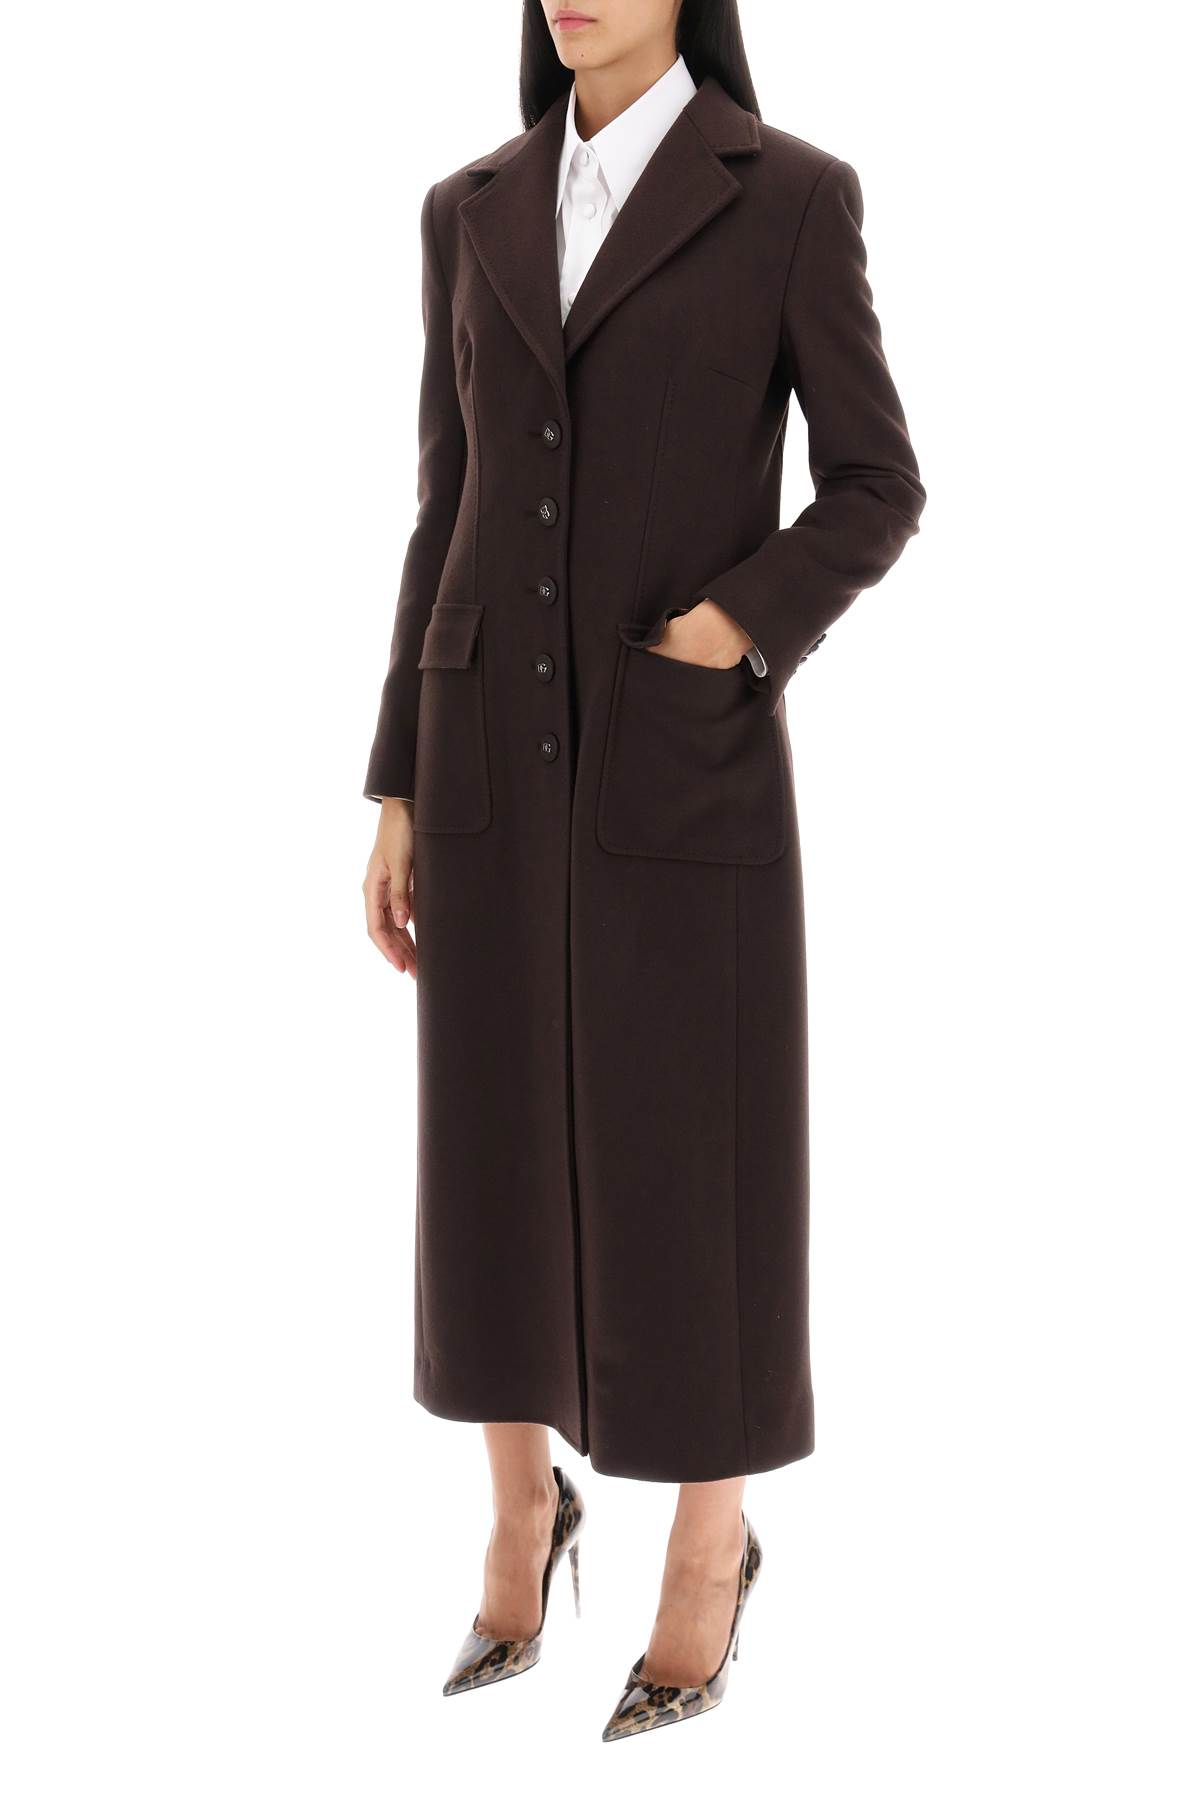 Shop Dolce & Gabbana Shaped Coat In Wool And Cashmere In Marrone Scuro 4 (brown)